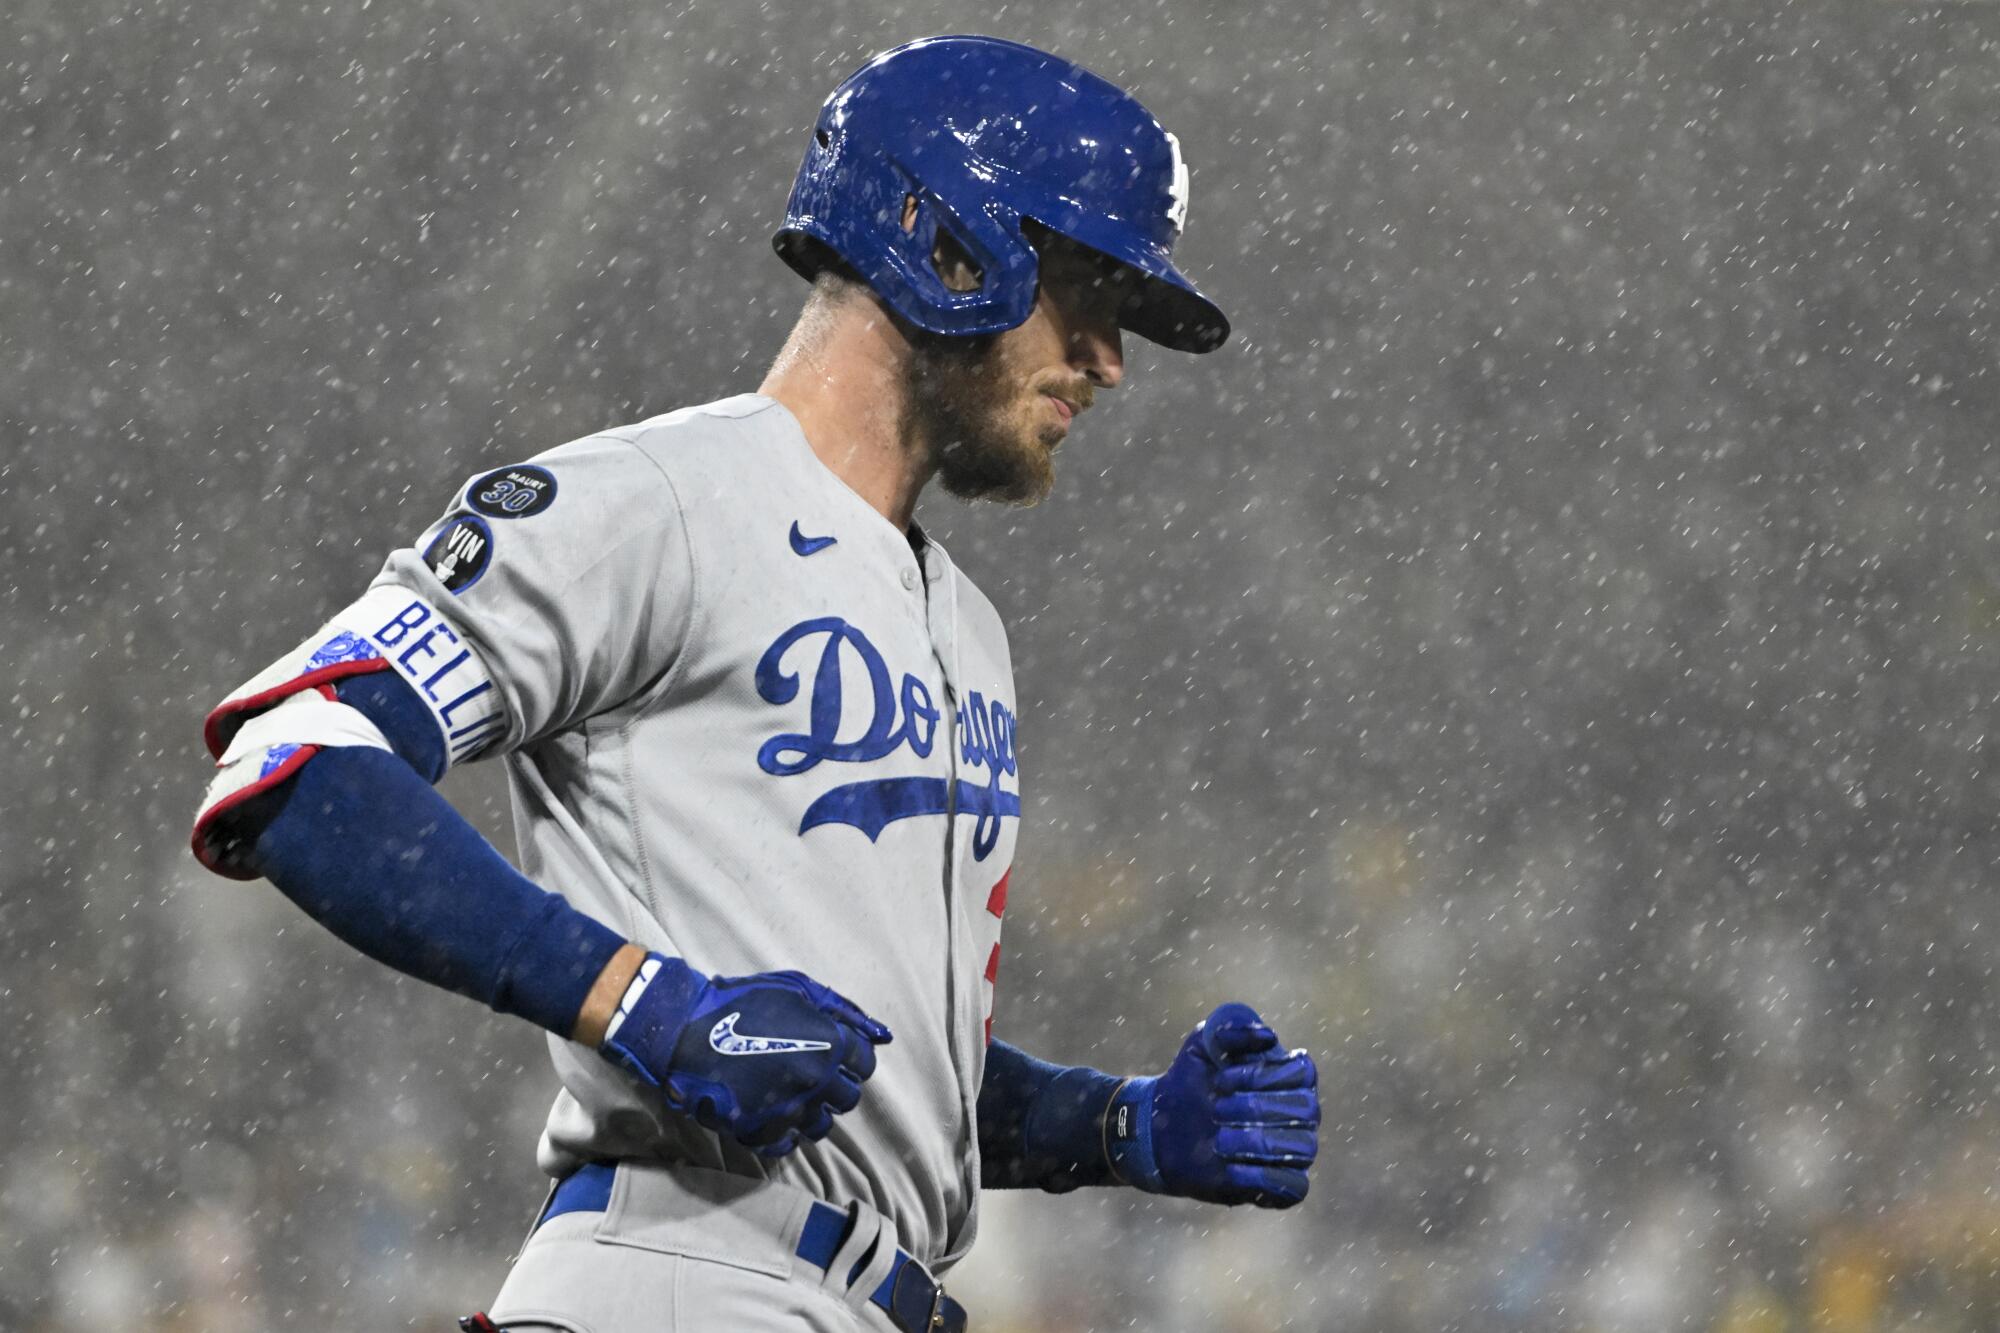 Cody Bellinger heads to first after flying out during the eighth inning of a season-ending 5-3 loss to the San Diego Padres.